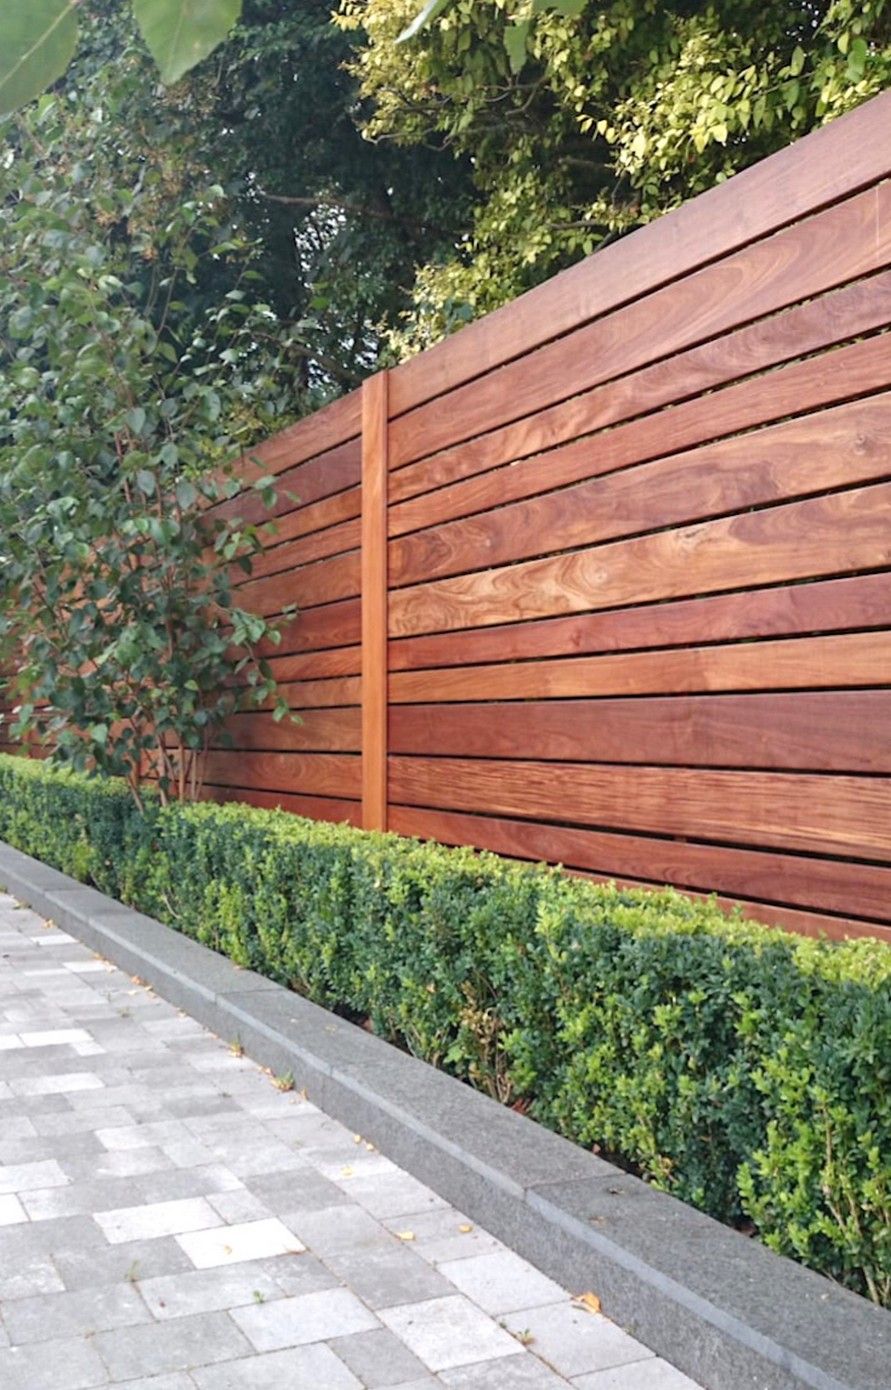 Make your tall fence less imposing with horizontal planks. Source: The Creativity Exchange